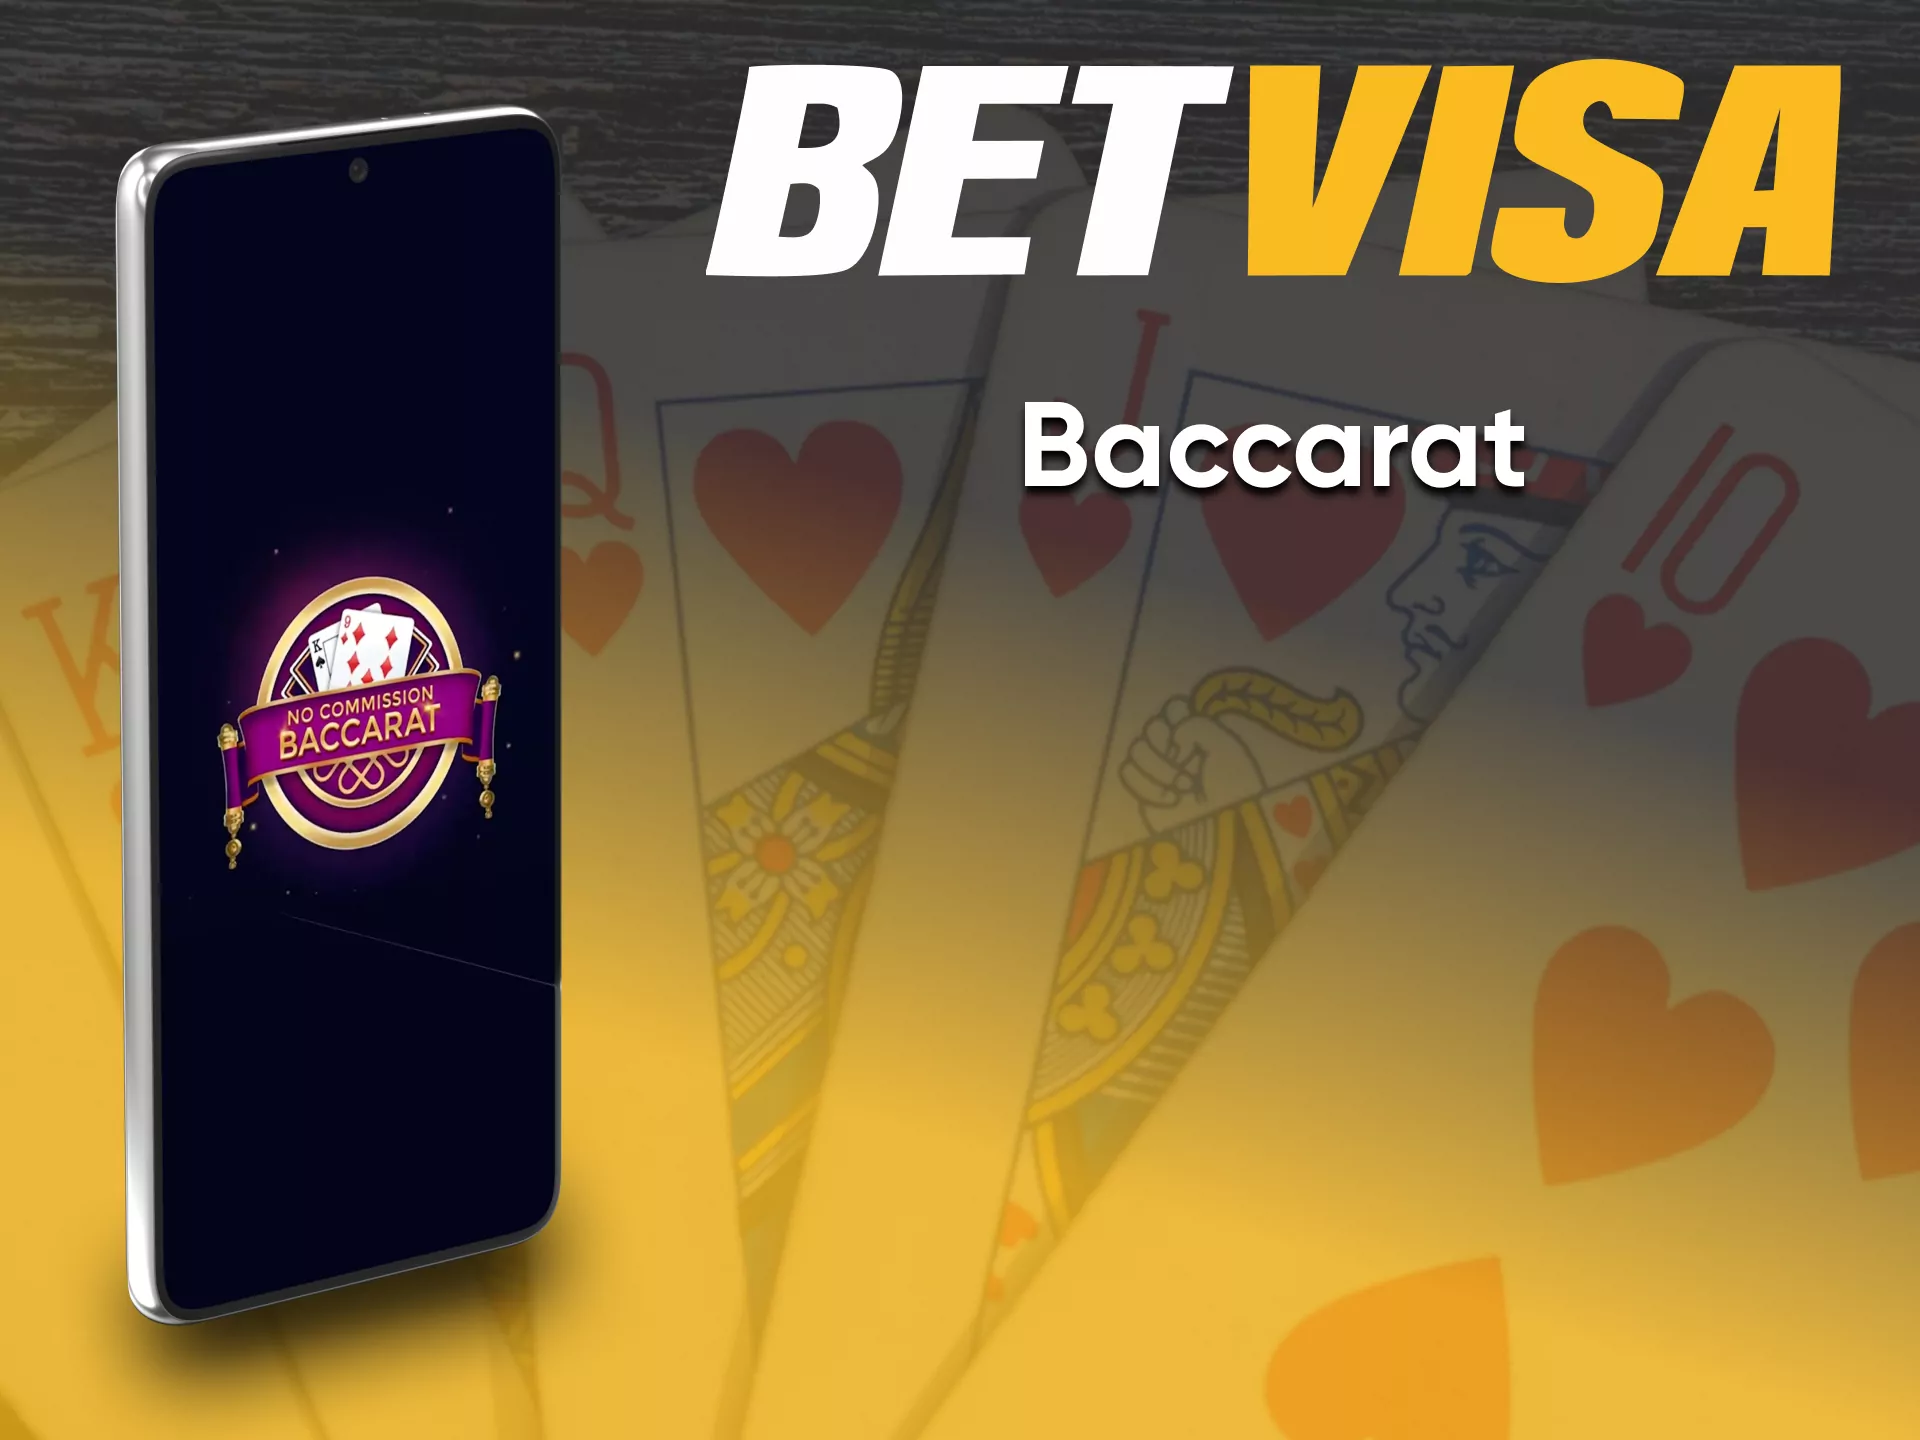 For Baccarat games from BetVisa, go to the Casino section.